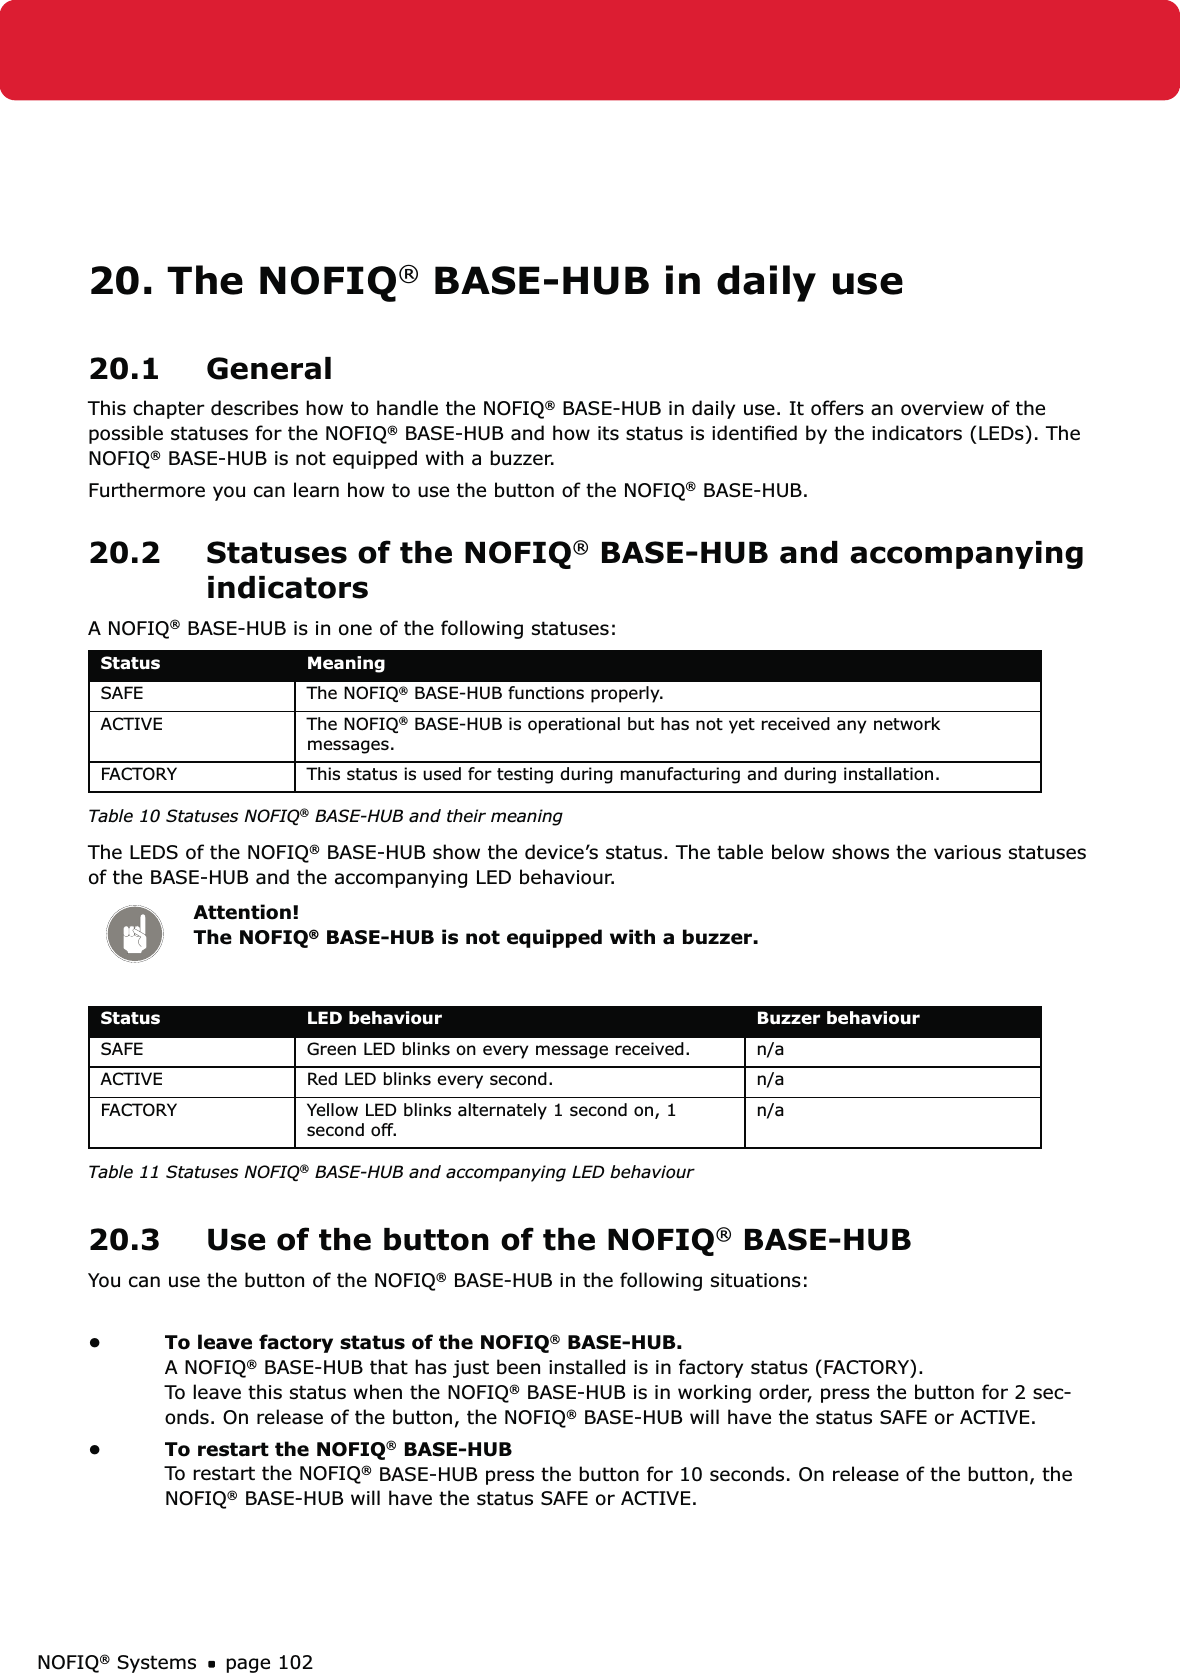 NOFIQ® Systems page 10220. The NOFIQ® BASE-HUB in daily use20.1 GeneralThis chapter describes how to handle the NOFIQ® BASE-HUB in daily use. It offers an overview of the possible statuses for the NOFIQ® BASE-HUB and how its status is identiﬁed by the indicators (LEDs). The NOFIQ® BASE-HUB is not equipped with a buzzer.Furthermore you can learn how to use the button of the NOFIQ® BASE-HUB.20.2  Statuses of the NOFIQ® BASE-HUB and accompanying indicatorsA NOFIQ® BASE-HUB is in one of the following statuses:Status MeaningSAFE The NOFIQ® BASE-HUB functions properly.ACTIVE The NOFIQ® BASE-HUB is operational but has not yet received any network messages.FACTORY This status is used for testing during manufacturing and during installation.Table 10 Statuses NOFIQ® BASE-HUB and their meaningThe LEDS of the NOFIQ® BASE-HUB show the device’s status. The table below shows the various statuses of the BASE-HUB and the accompanying LED behaviour. Attention! The NOFIQ® BASE-HUB is not equipped with a buzzer.Status LED behaviour Buzzer behaviourSAFE Green LED blinks on every message received. n/aACTIVE Red LED blinks every second. n/aFACTORY Yellow LED blinks alternately 1 second on, 1 second off.n/aTable 11 Statuses NOFIQ® BASE-HUB and accompanying LED behaviour20.3  Use of the button of the NOFIQ® BASE-HUBYou can use the button of the NOFIQ® BASE-HUB in the following situations:To leave factory status of the NOFIQ•  ® BASE-HUB. A NOFIQ® BASE-HUB that has just been installed is in factory status (FACTORY).  To leave this status when the NOFIQ® BASE-HUB is in working order, press the button for 2 sec-onds. On release of the button, the NOFIQ® BASE-HUB will have the status SAFE or ACTIVE.To restart the NOFIQ•  ® BASE-HUB To restart the NOFIQ® BASE-HUB press the button for 10 seconds. On release of the button, the NOFIQ® BASE-HUB will have the status SAFE or ACTIVE.